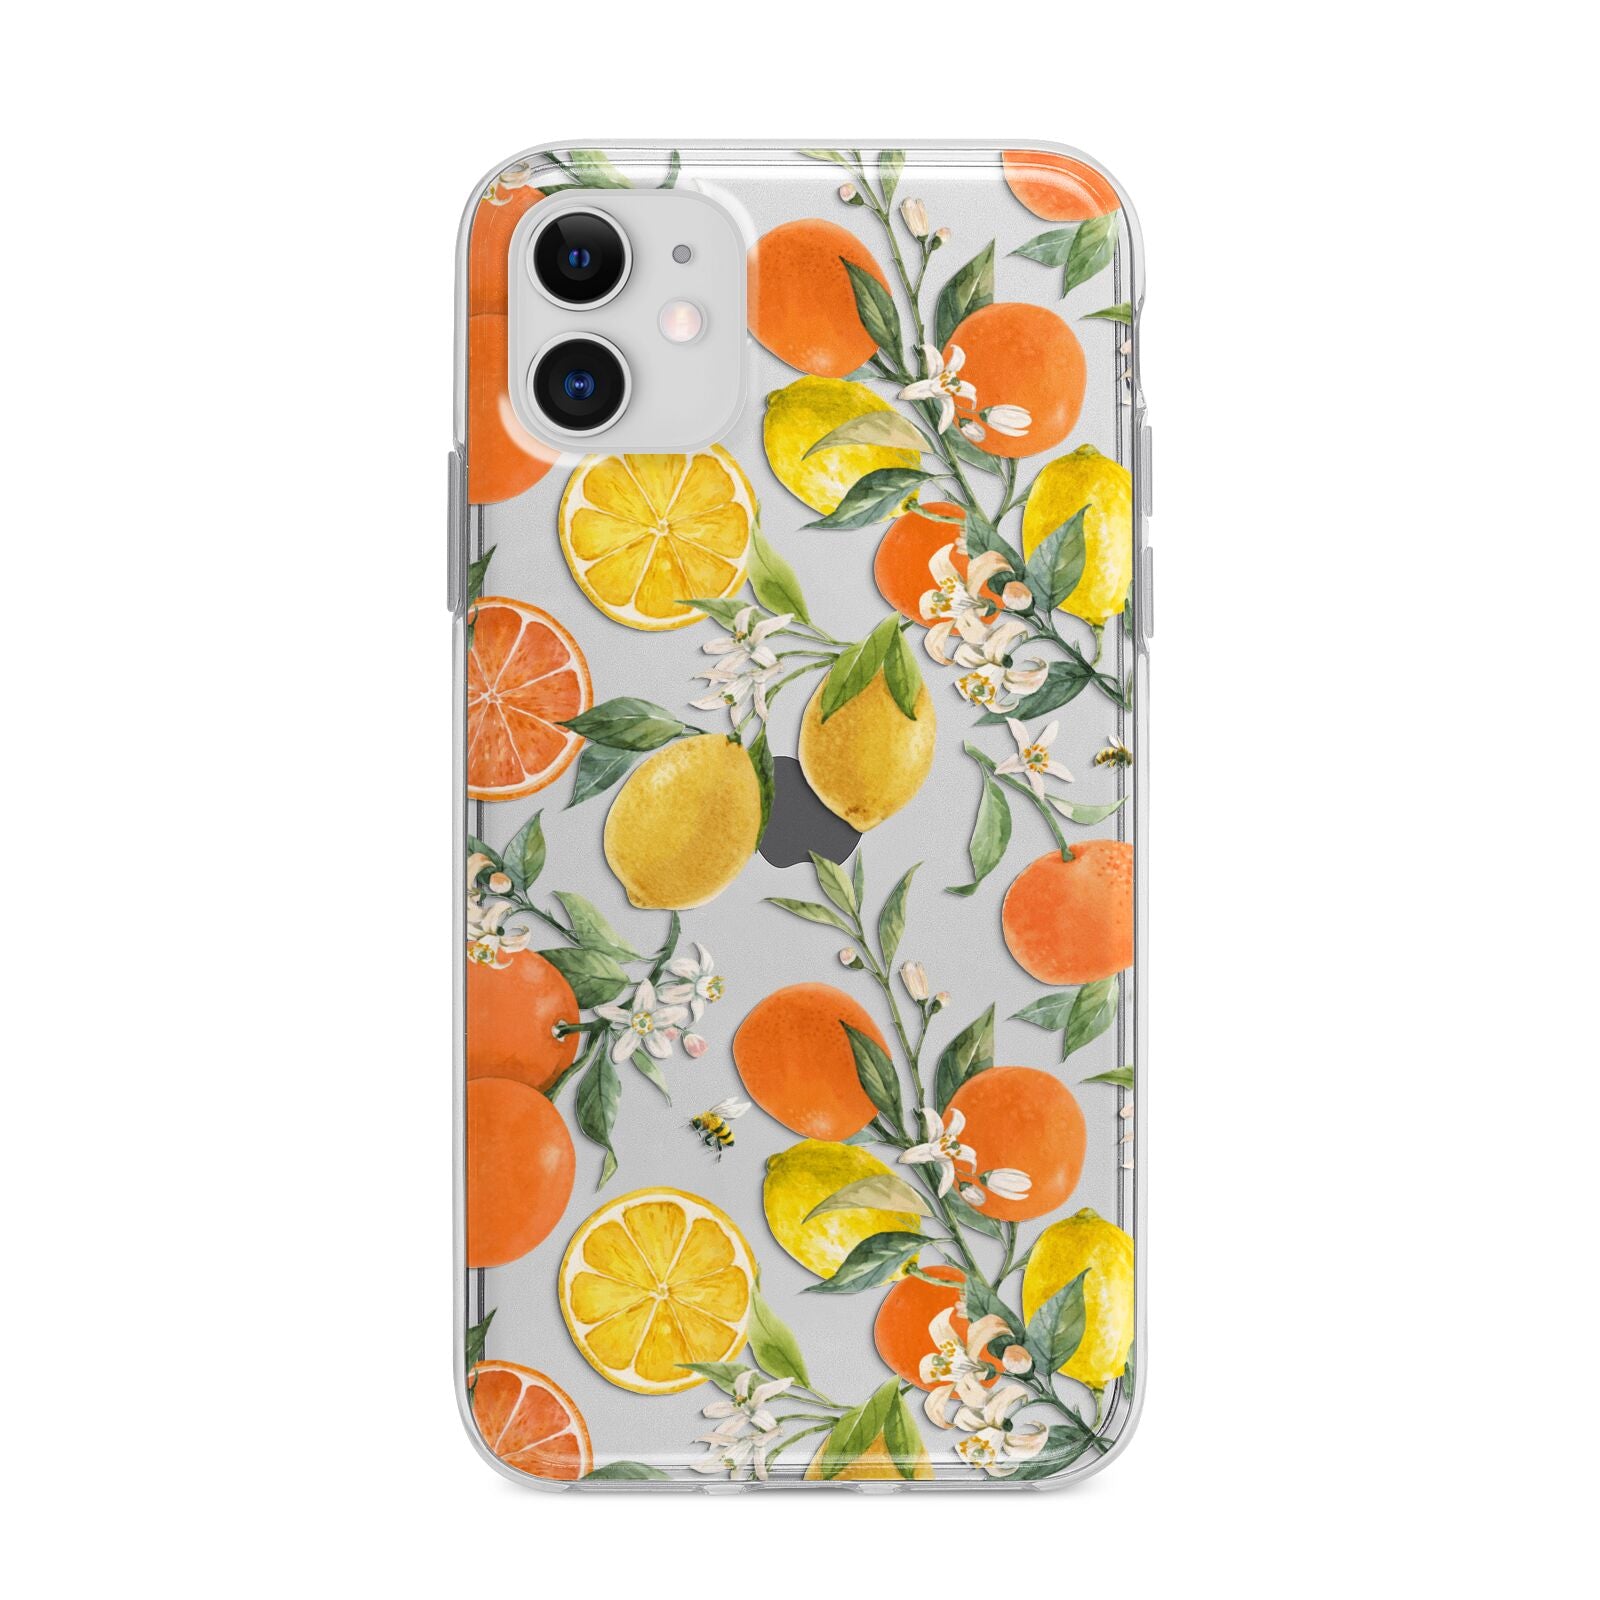 Lemons and Oranges Apple iPhone 11 in White with Bumper Case